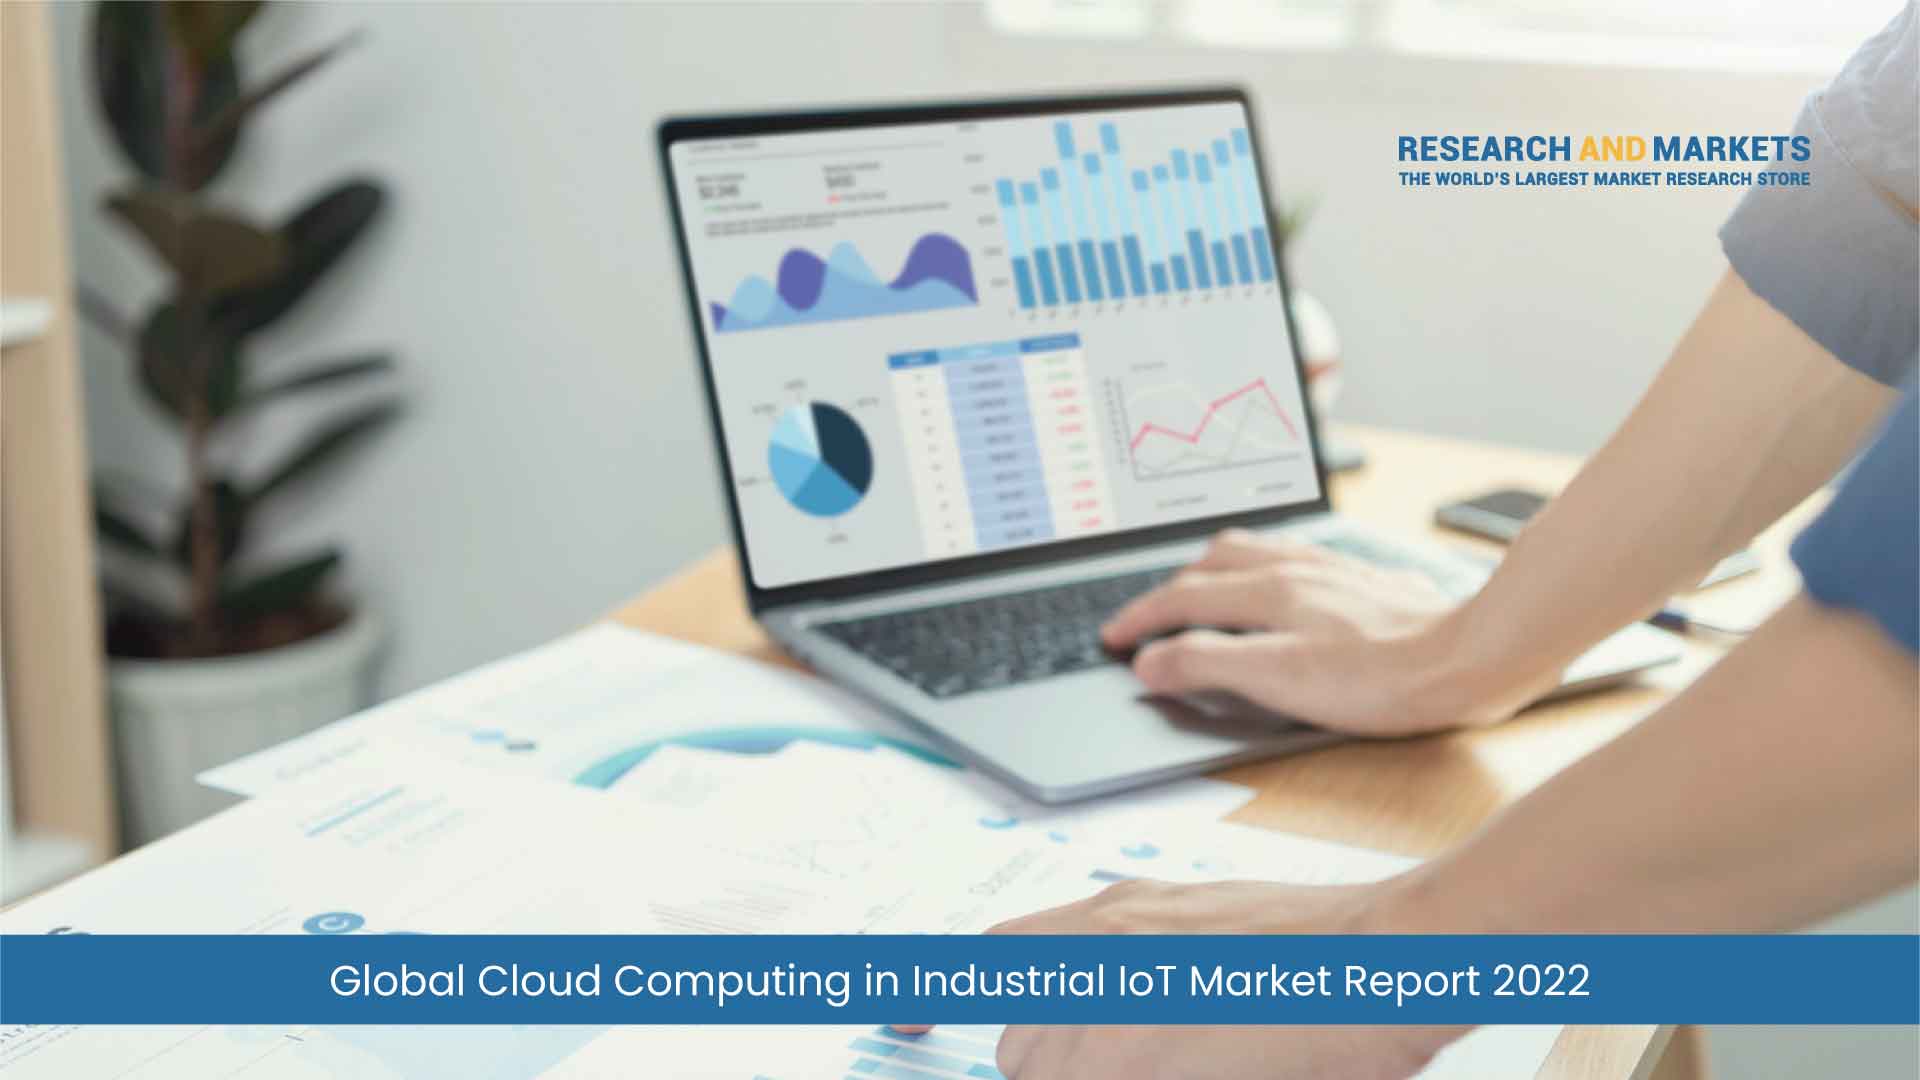 Global Cloud Computing in Industrial IoT Market Report 2022: A $300+ Billion Market by 2028, Combining Infrastructure Equipment and Embedded Solution, Software Application, and Platform Solution